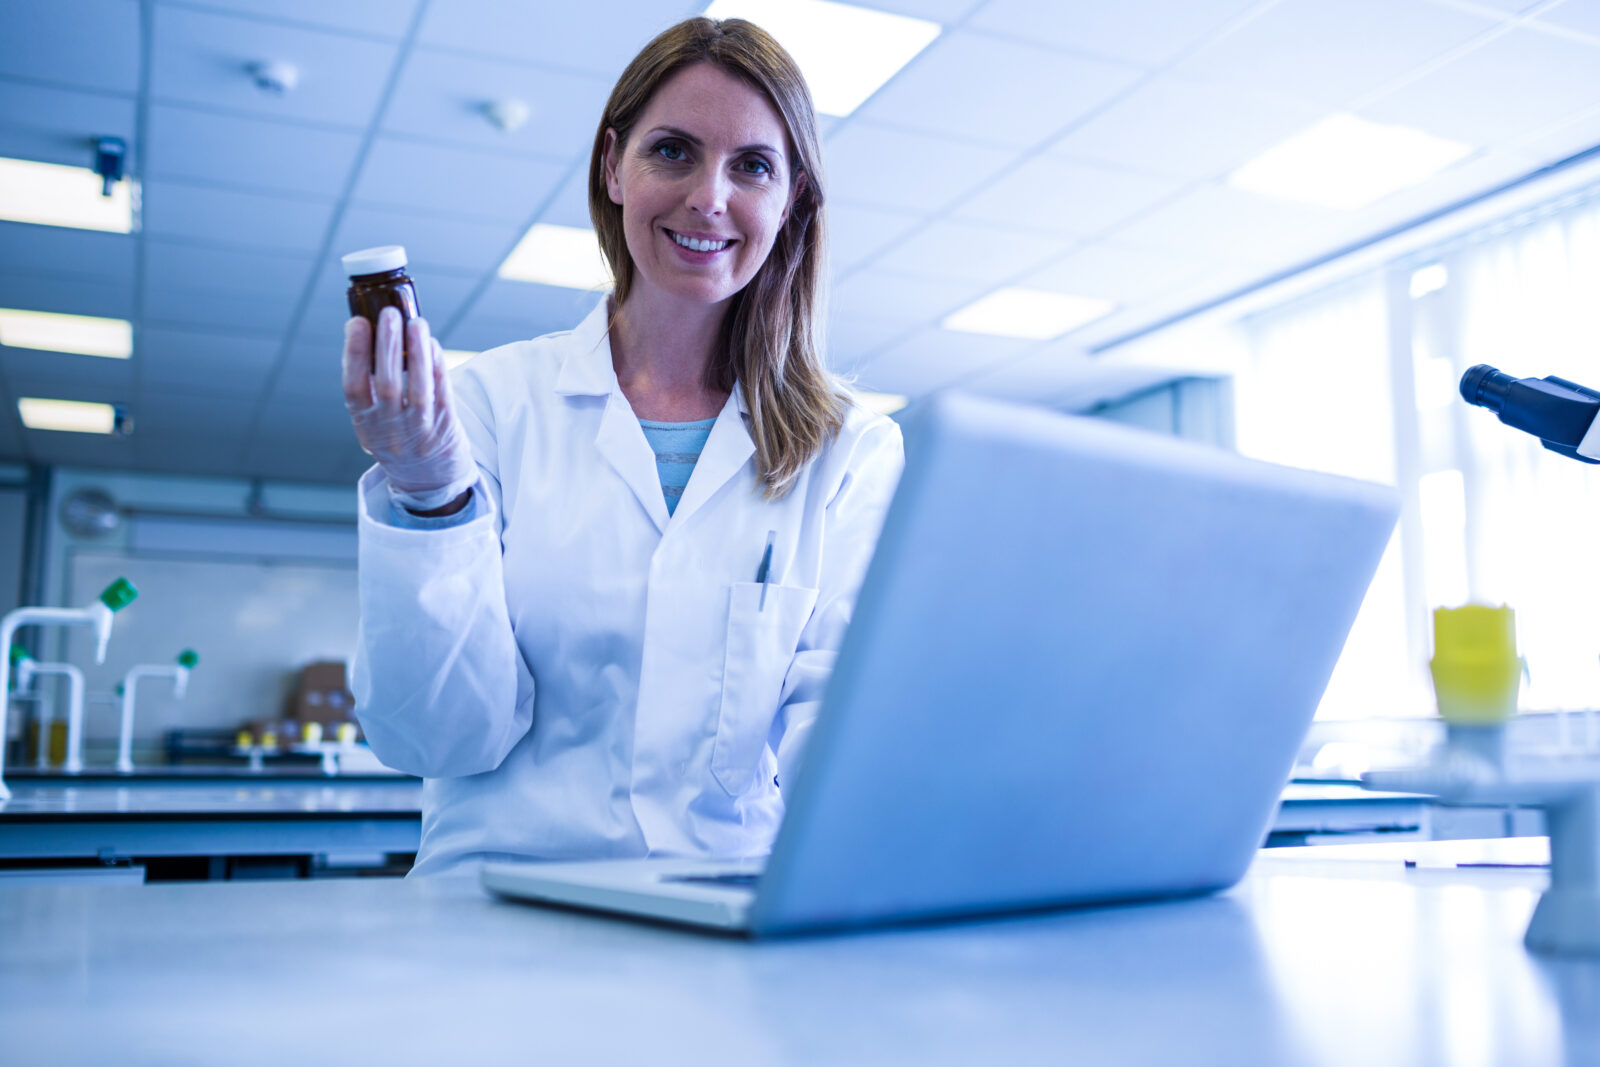 Lady in Lab in front of a computer screen holding a pot